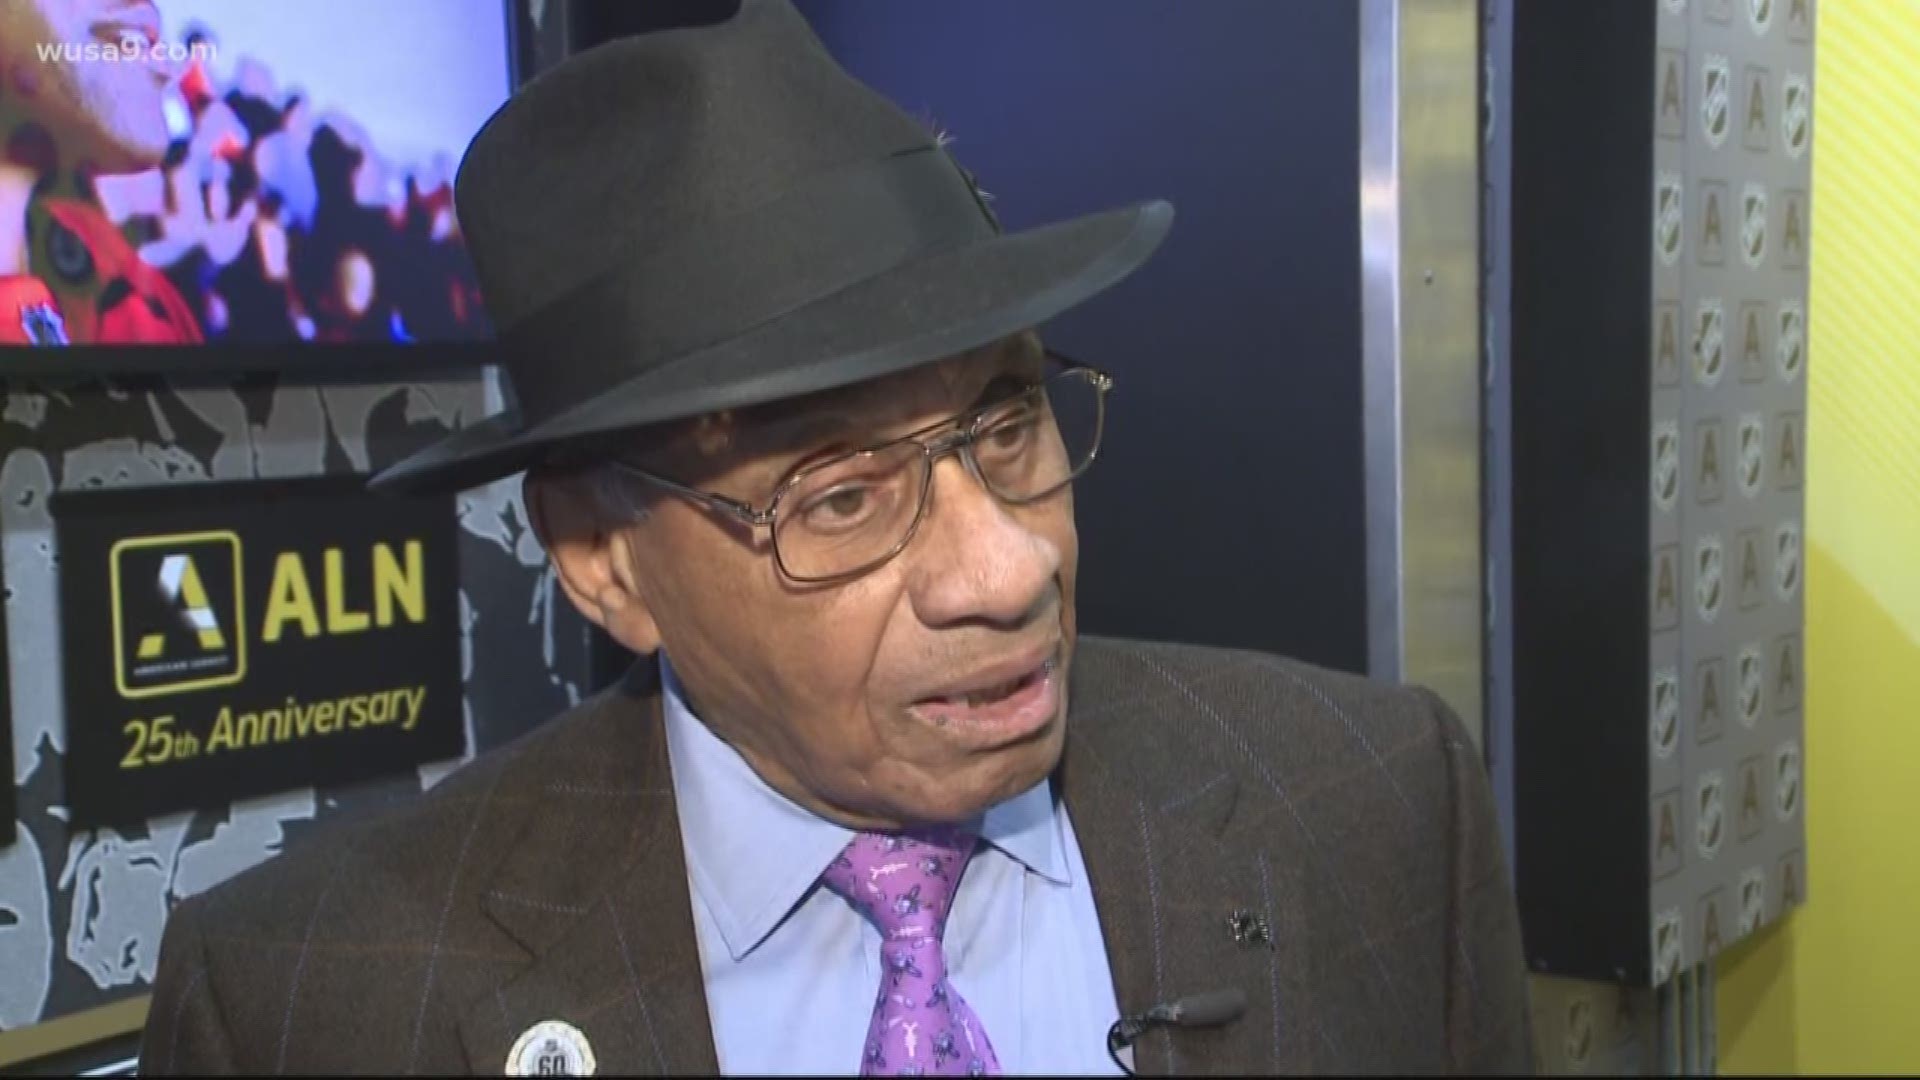 We talk with Willie O'ree, the NHL's first black hockey player, at the league's mobile museum celebrating black hockey history.